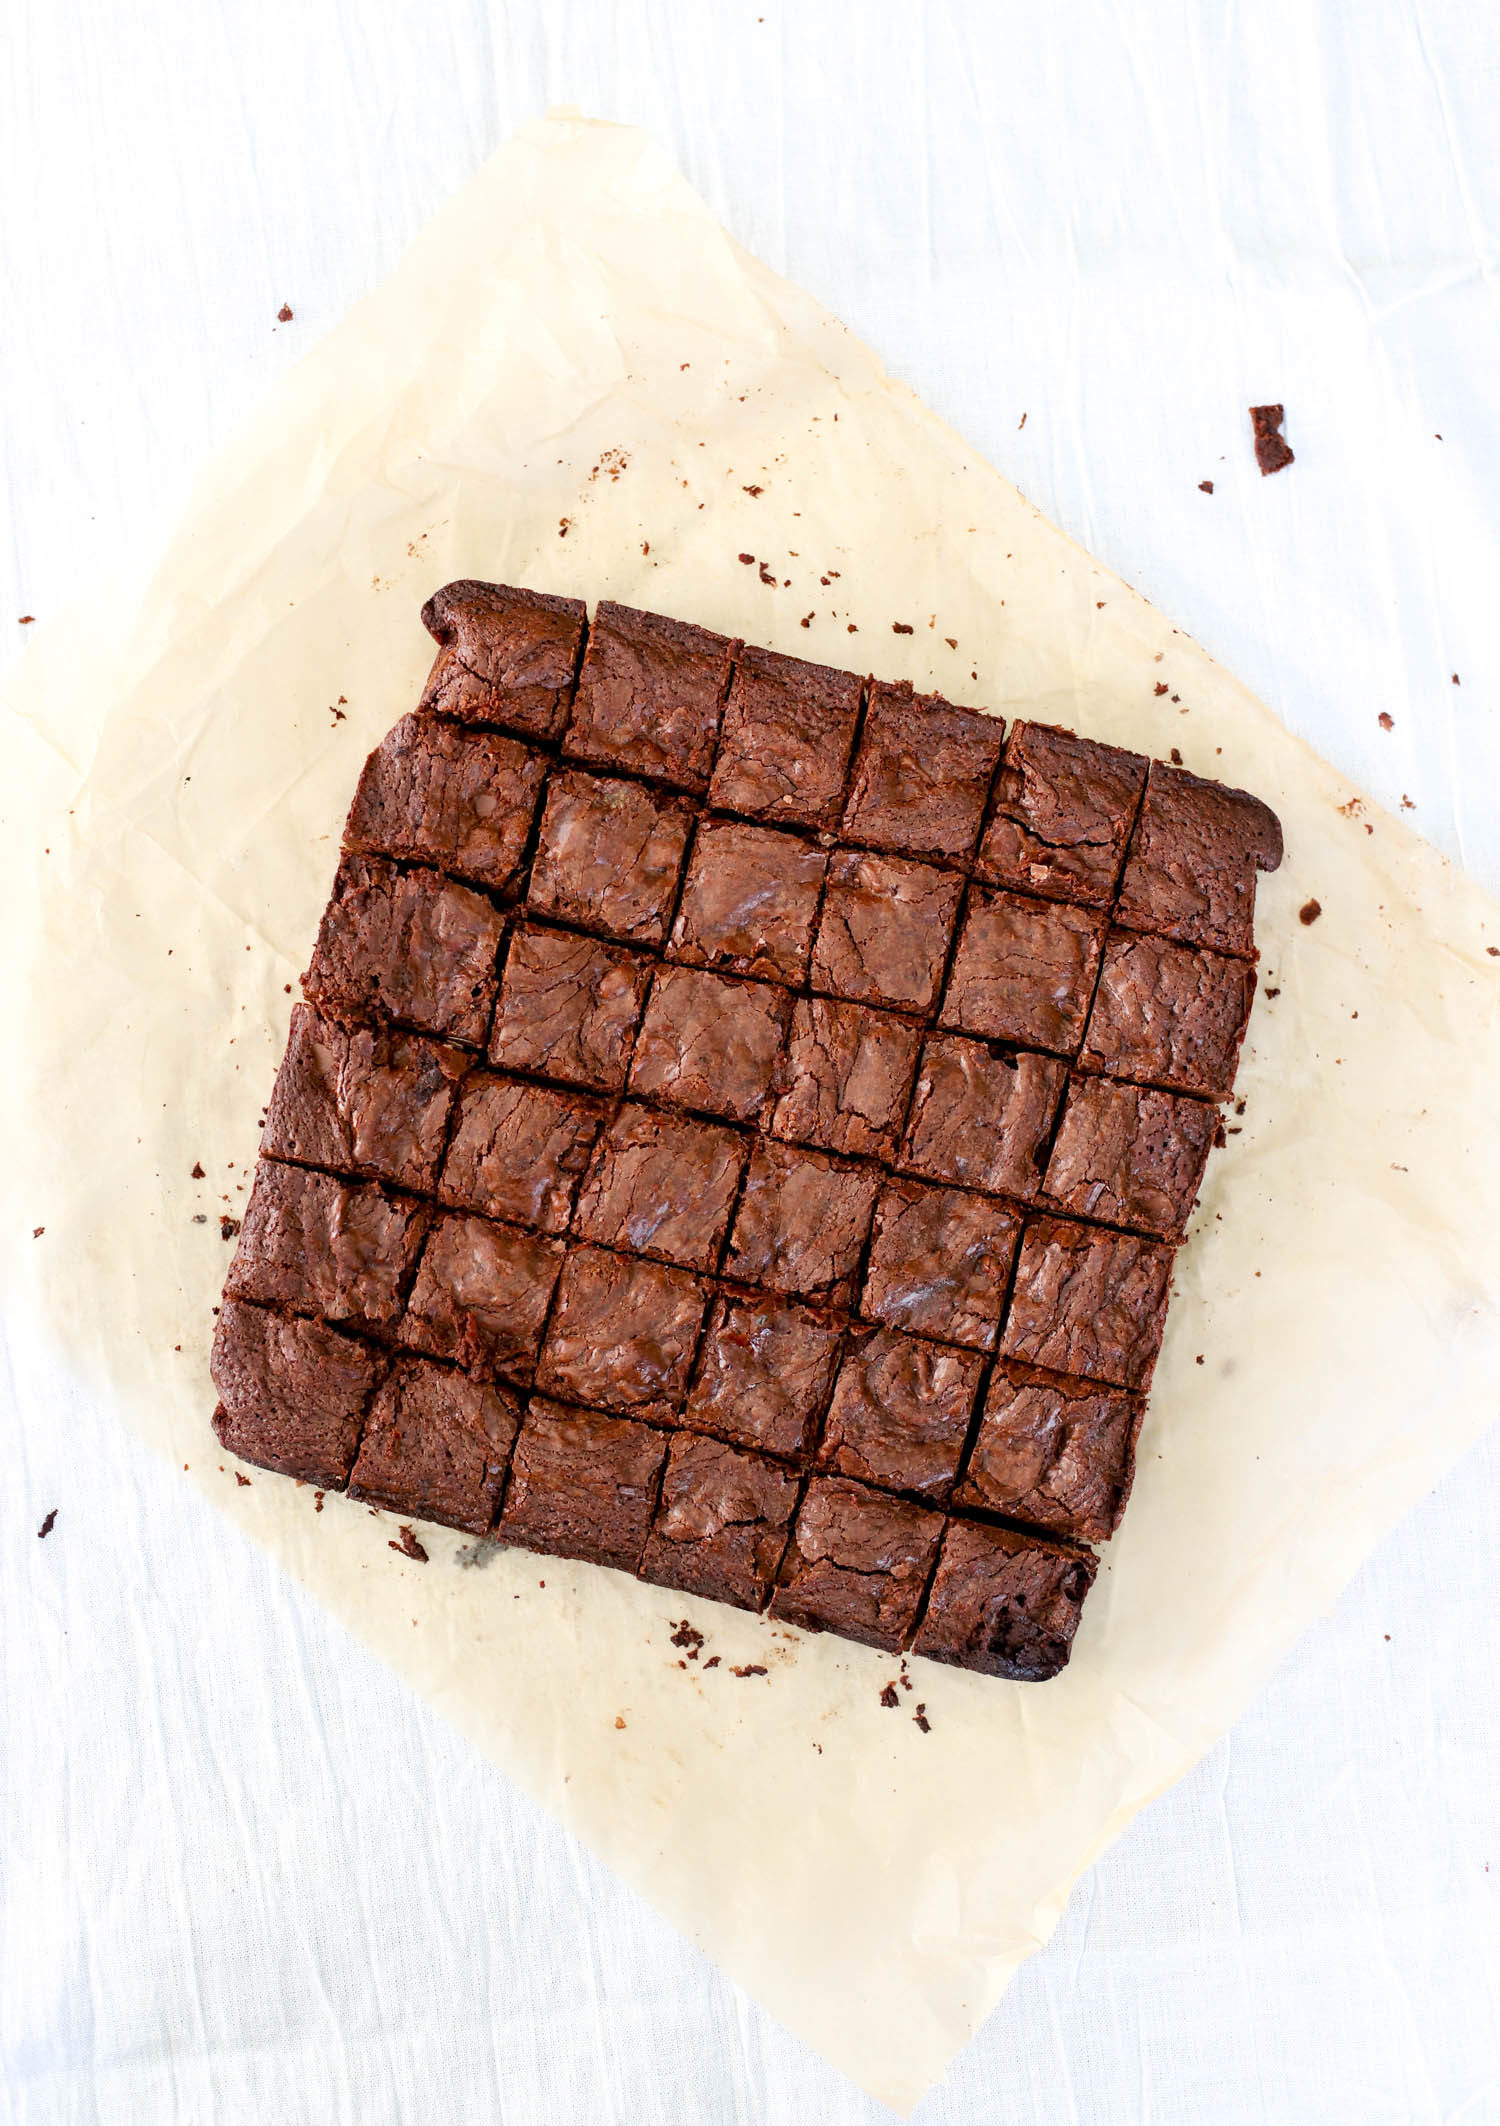 Easy Fudge Brownies Recipe from Scratch